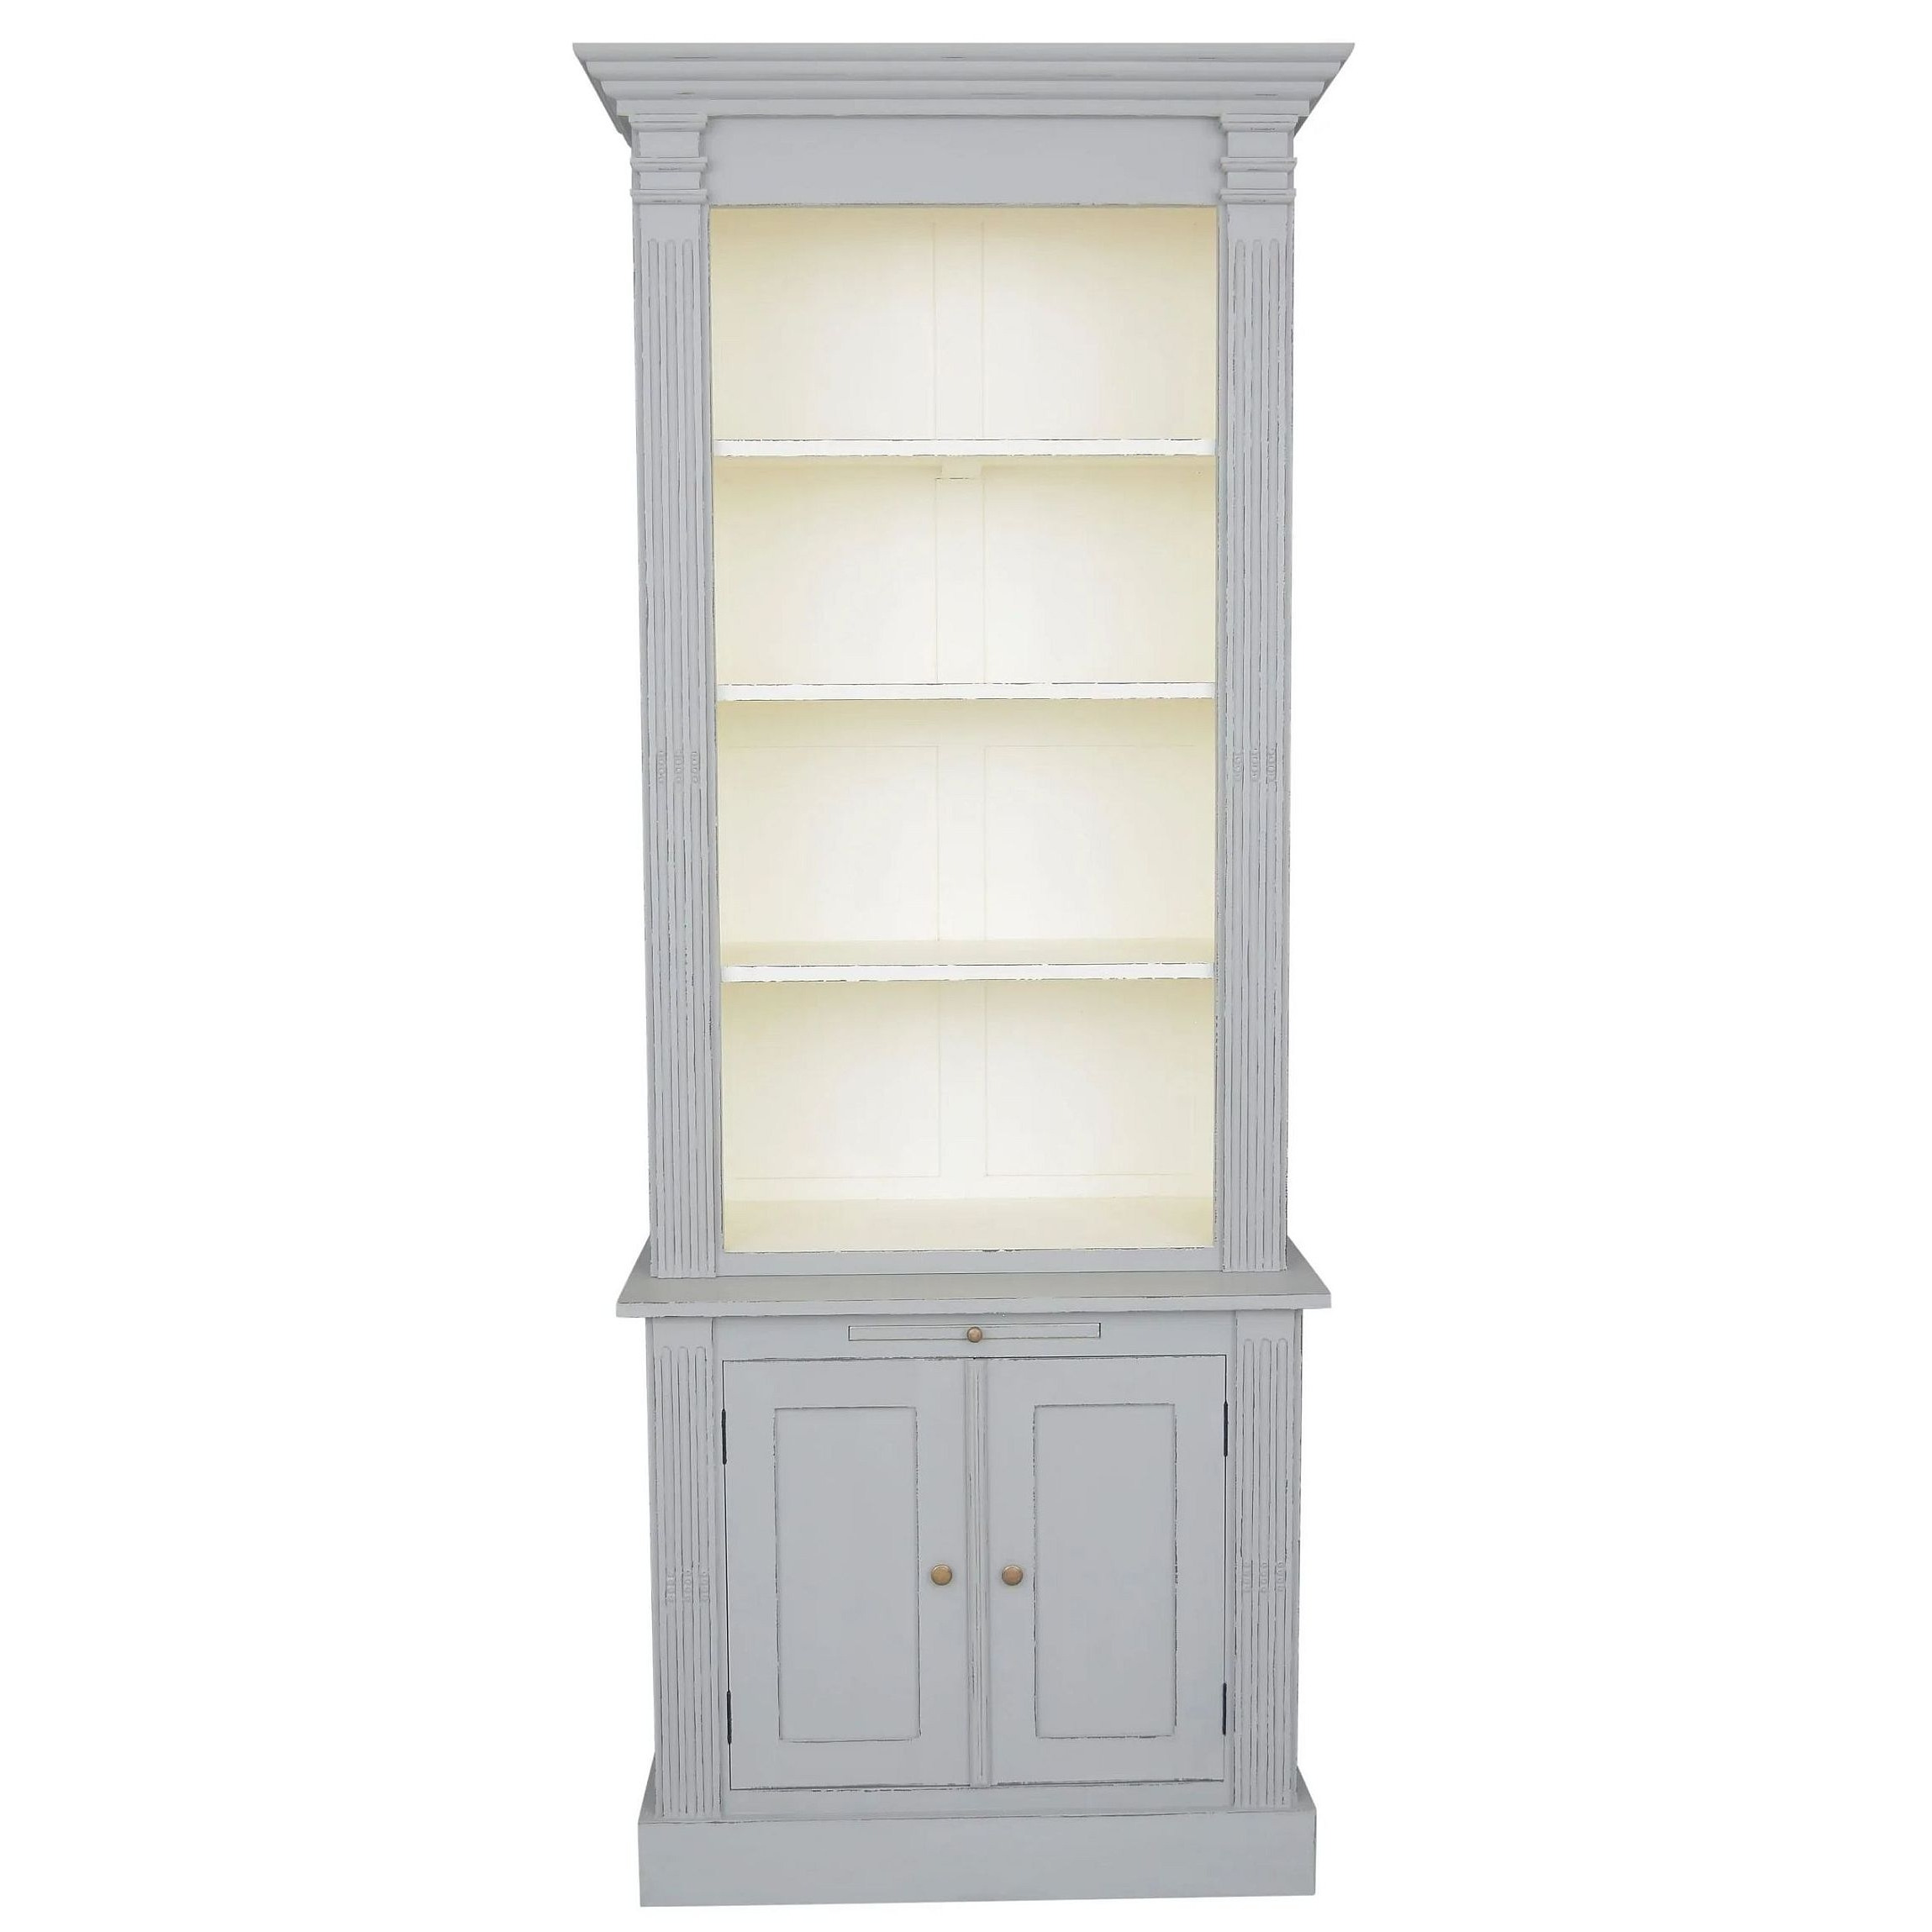 Valerie French Distressed Stone Grey 2 Door Bookcase - image 1